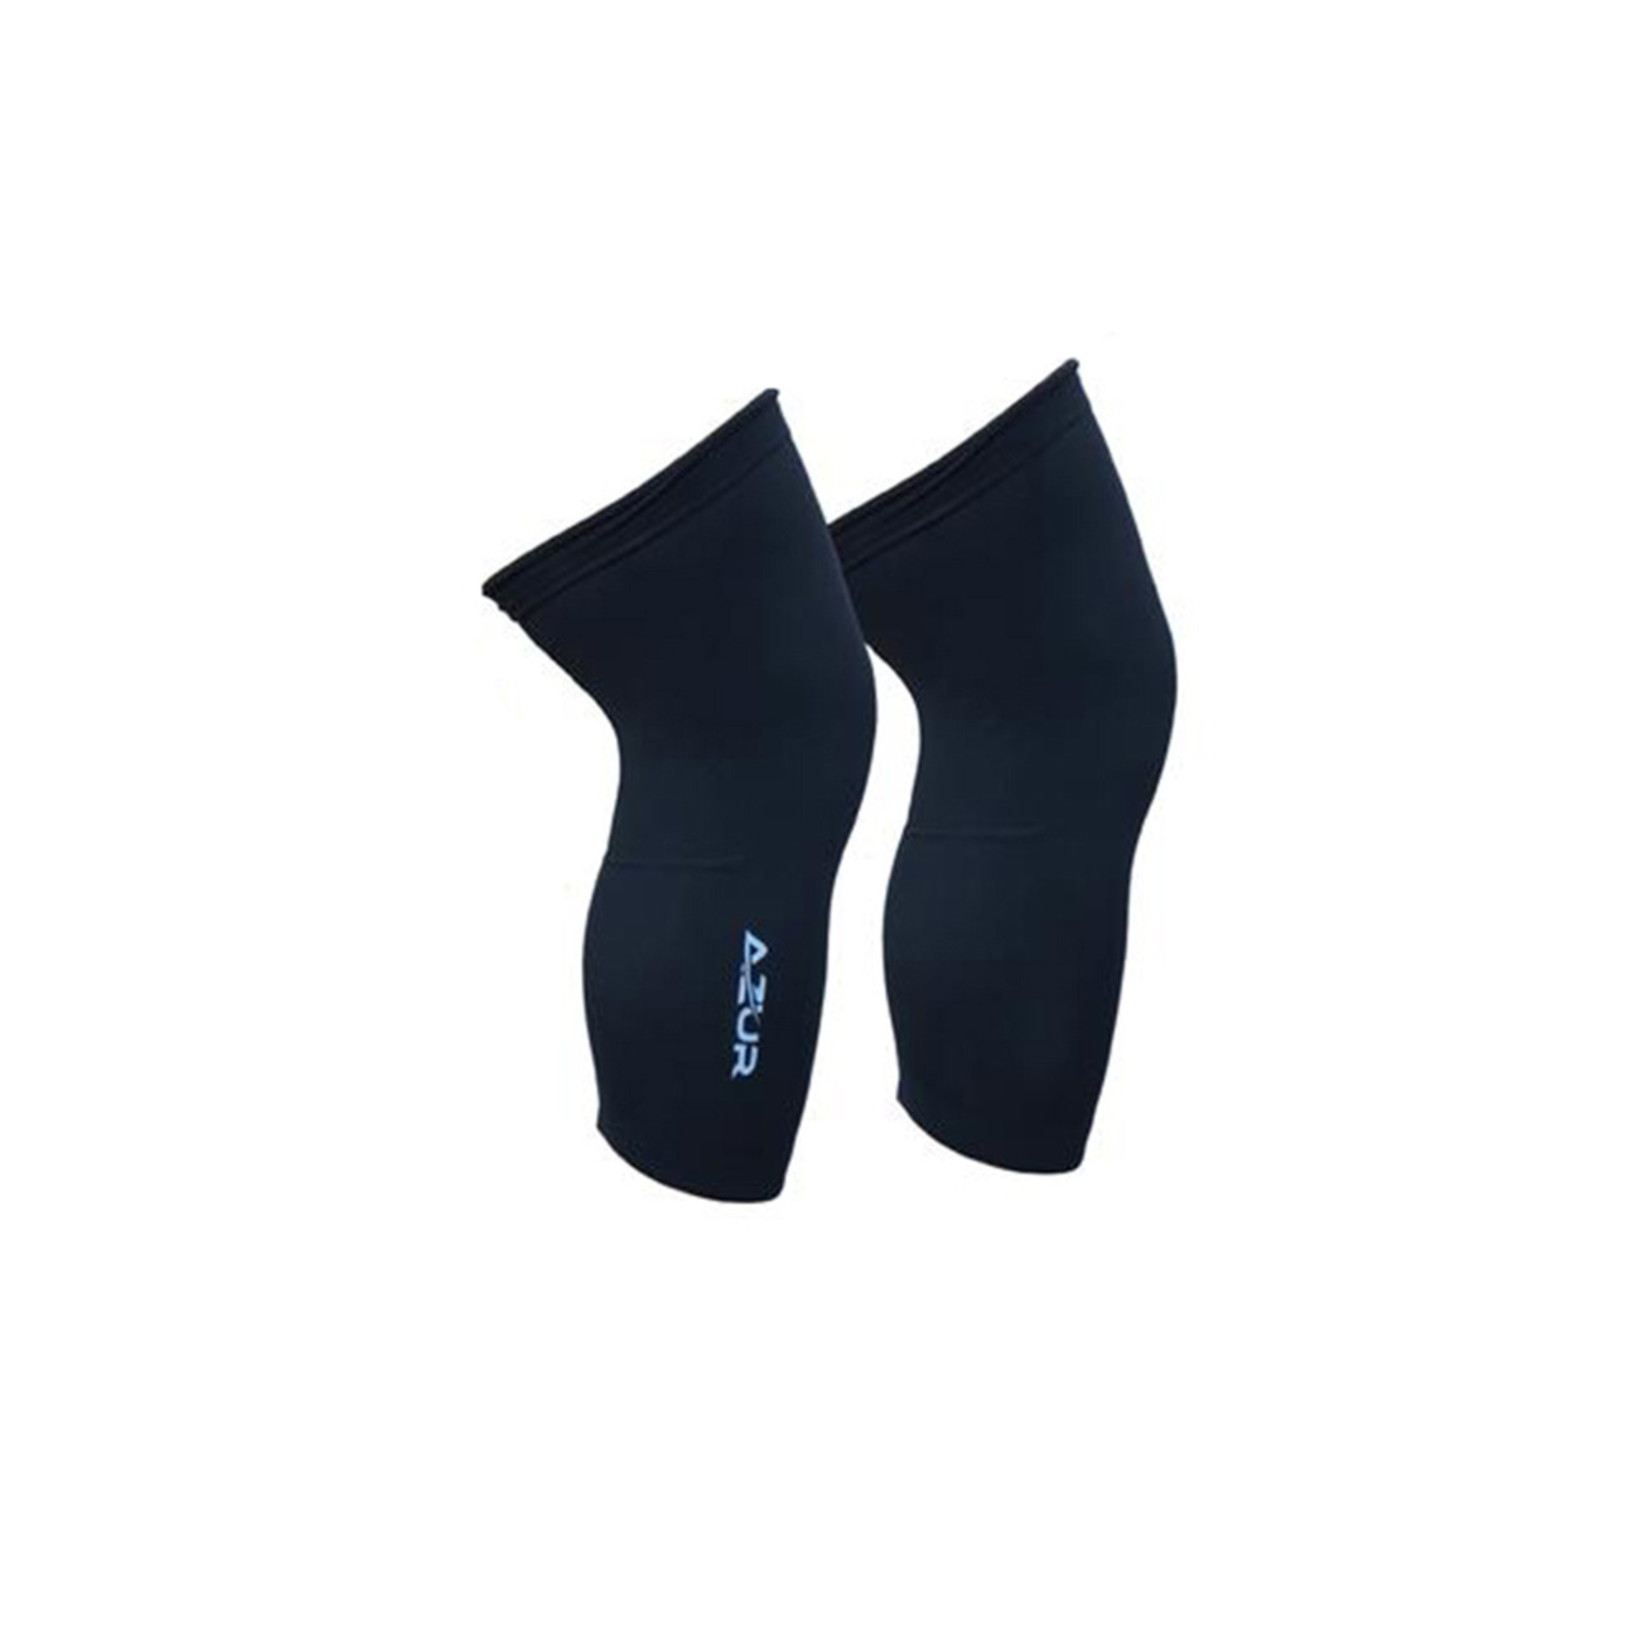 Azur Azur Knee Warmers Silicon Grippers And Offset Seams - Medium